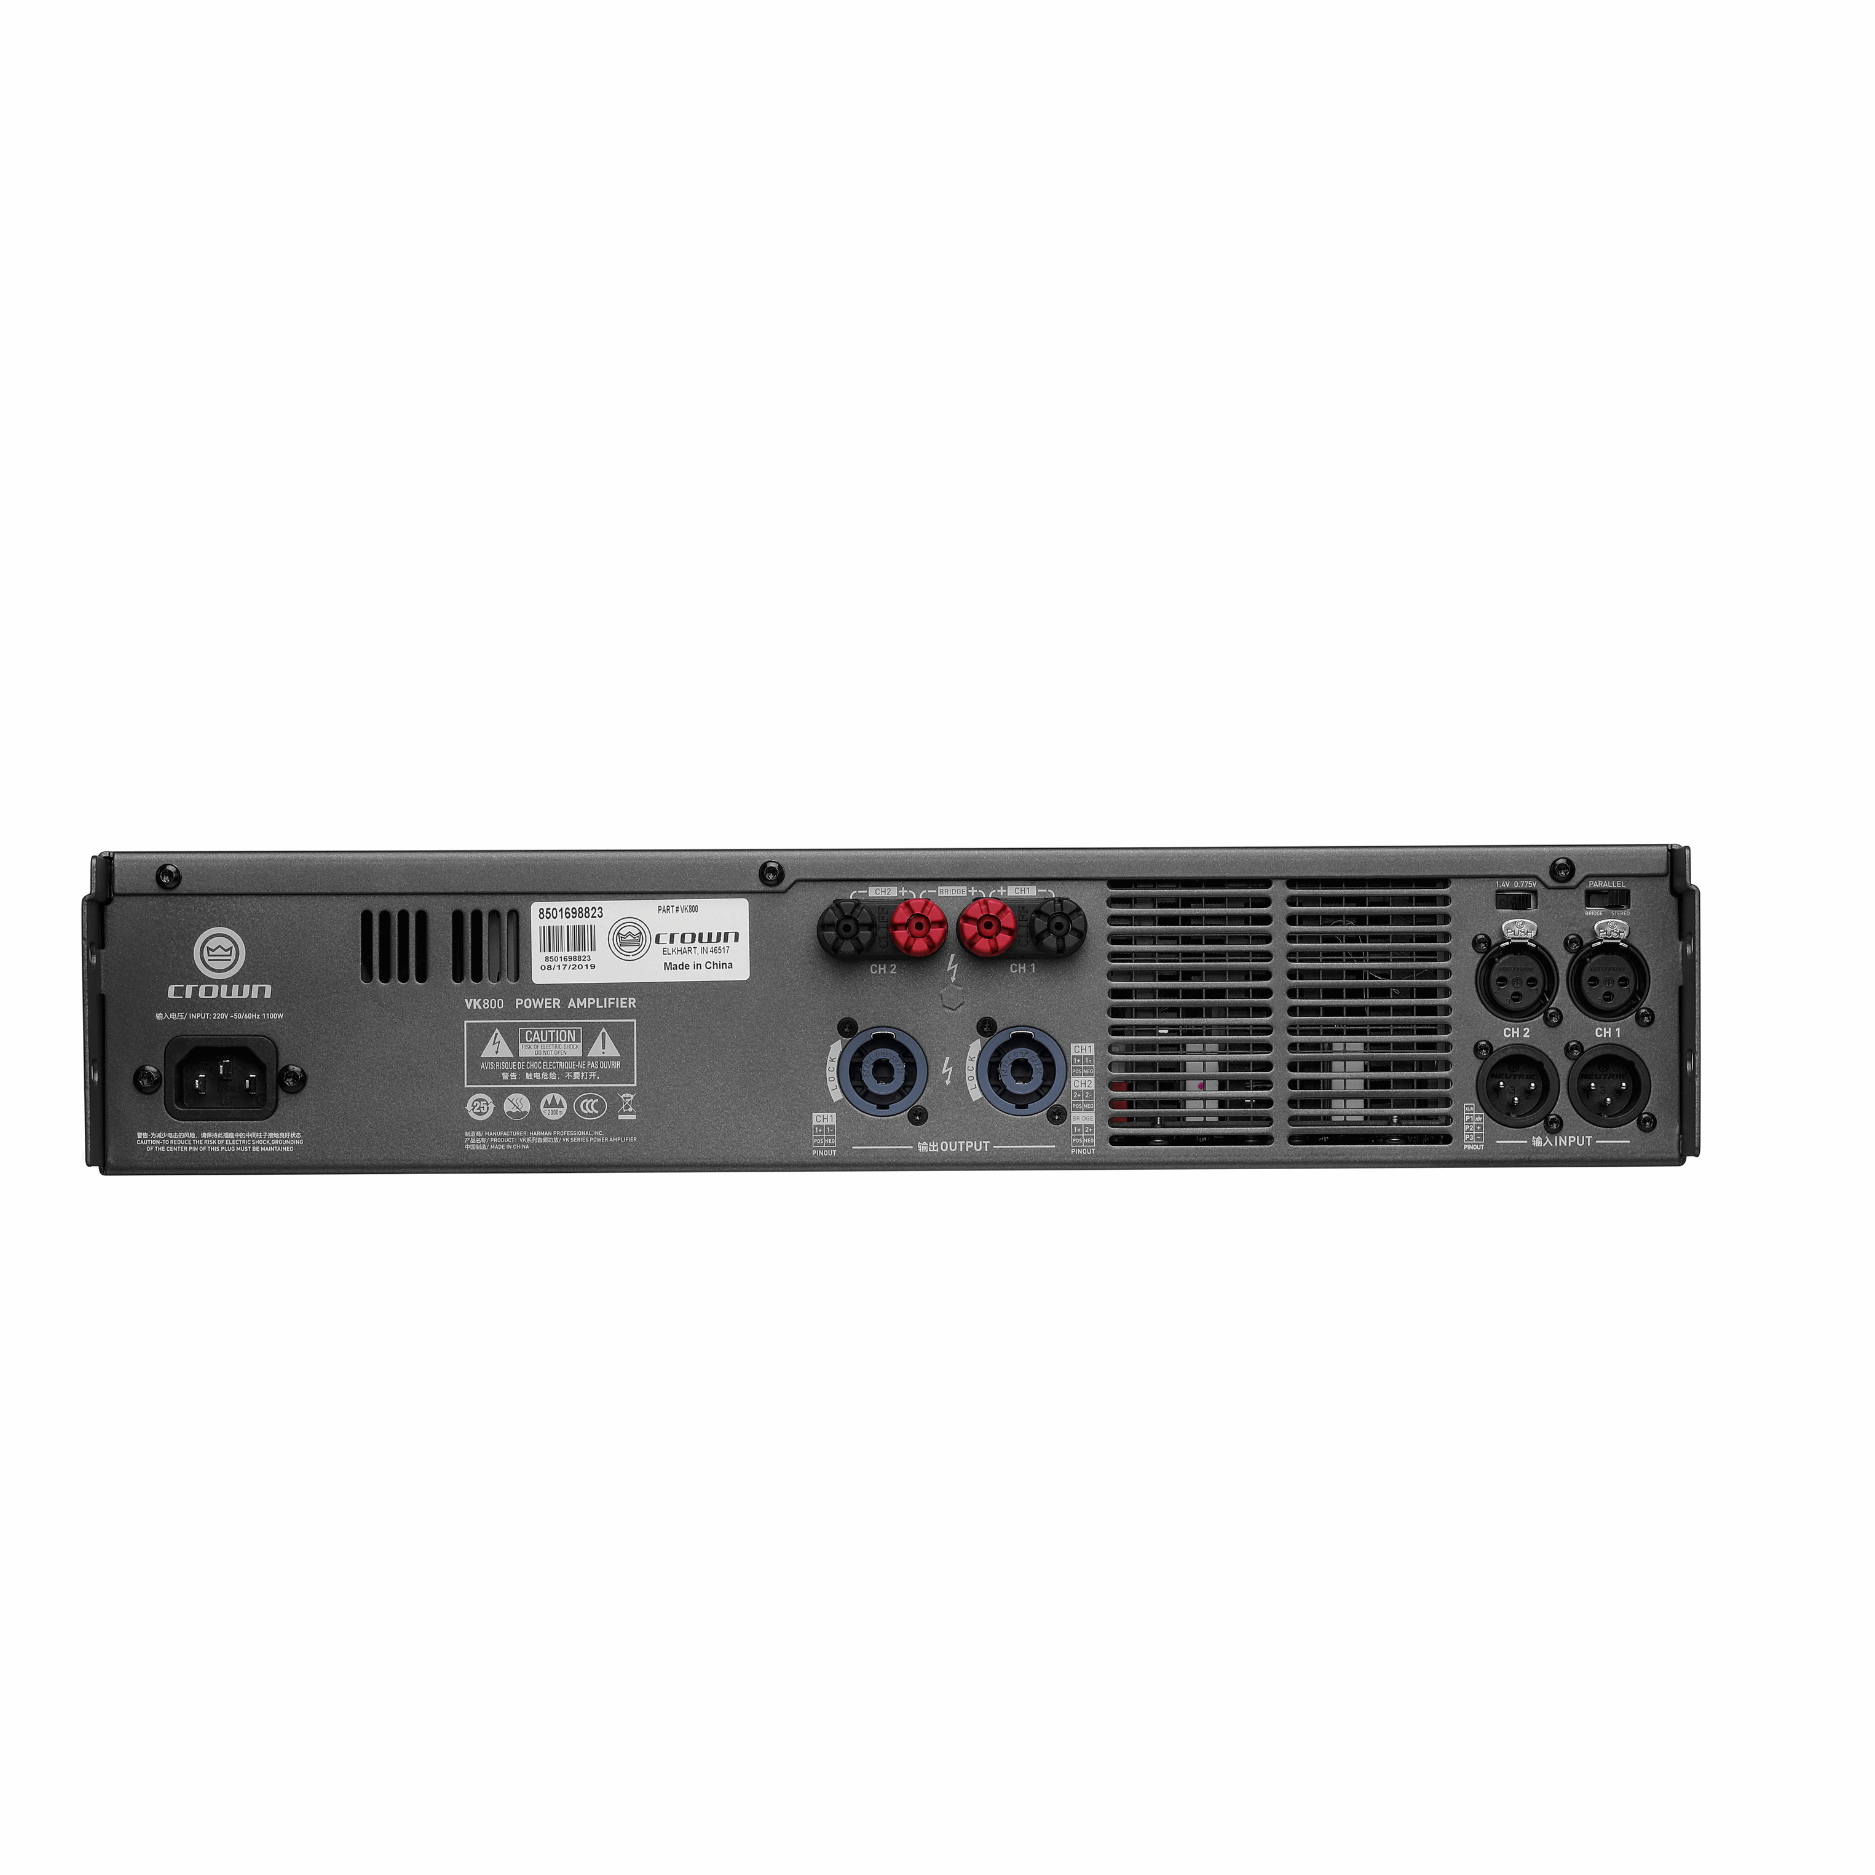 Crown VK550 Reliable, Easy-To-Use Amplifier For Nightlife Applications ( VK 550 / VK-550 )